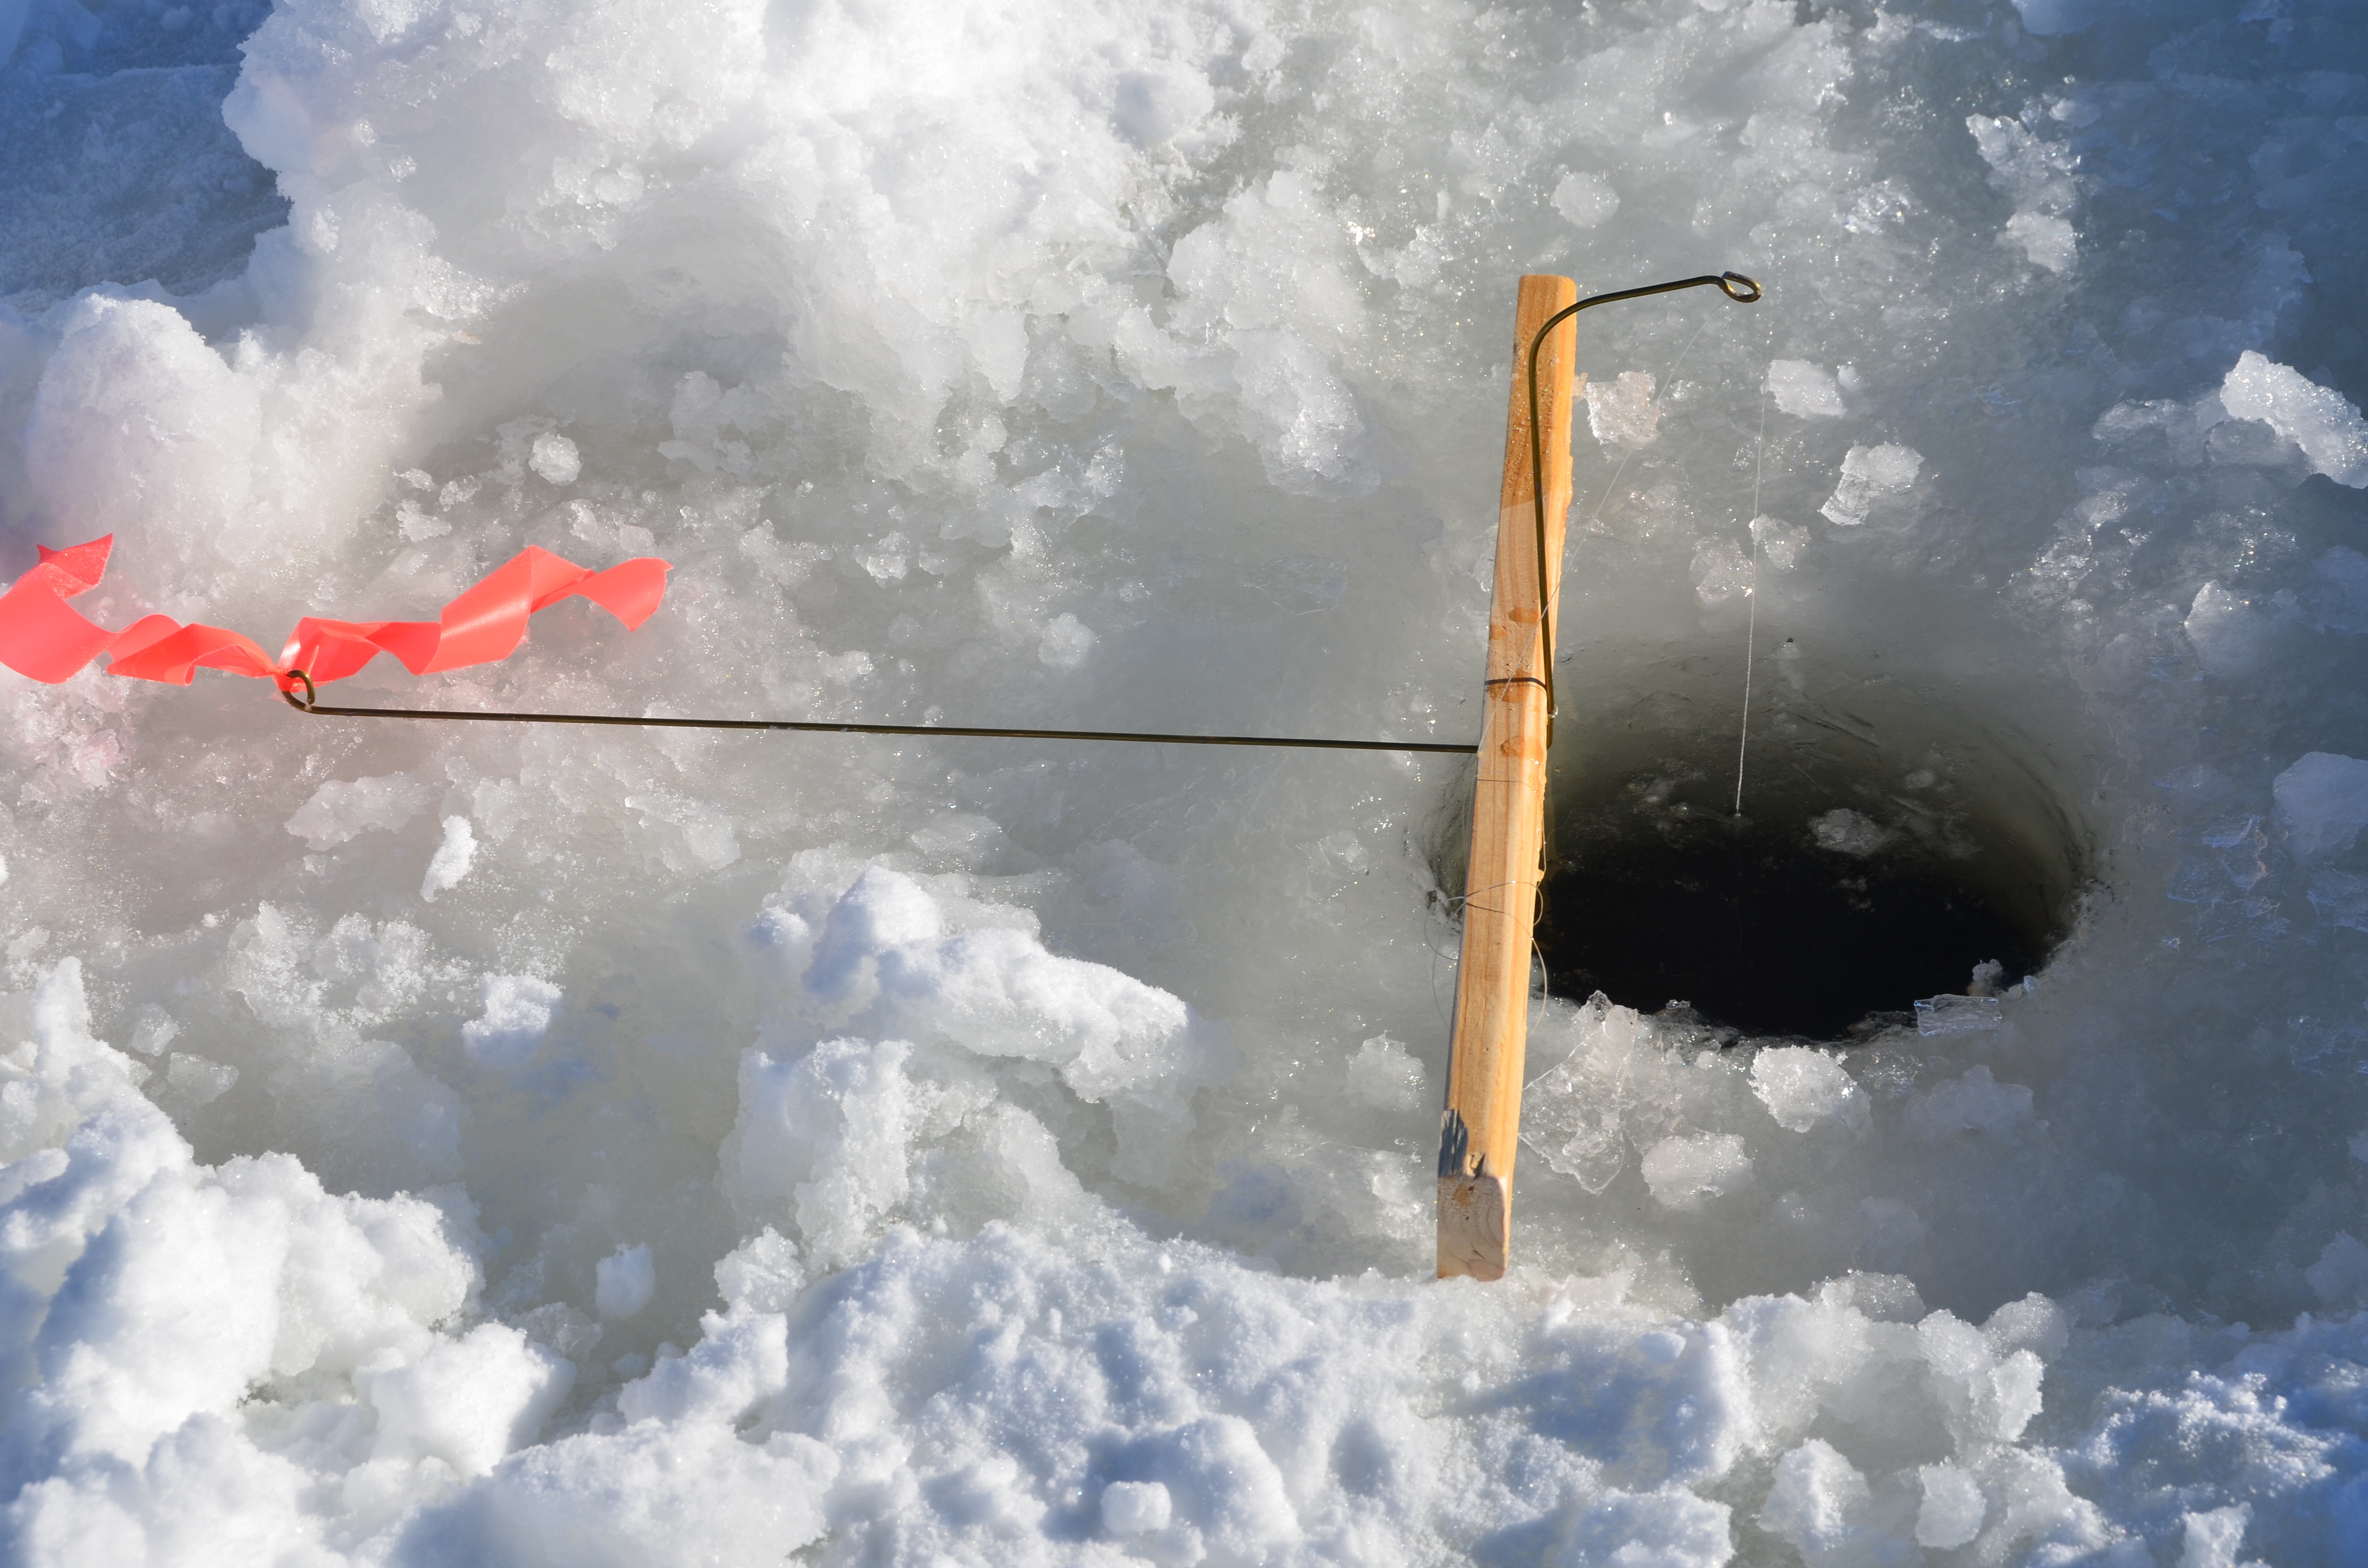 Tip-up rig, ice fishing, 